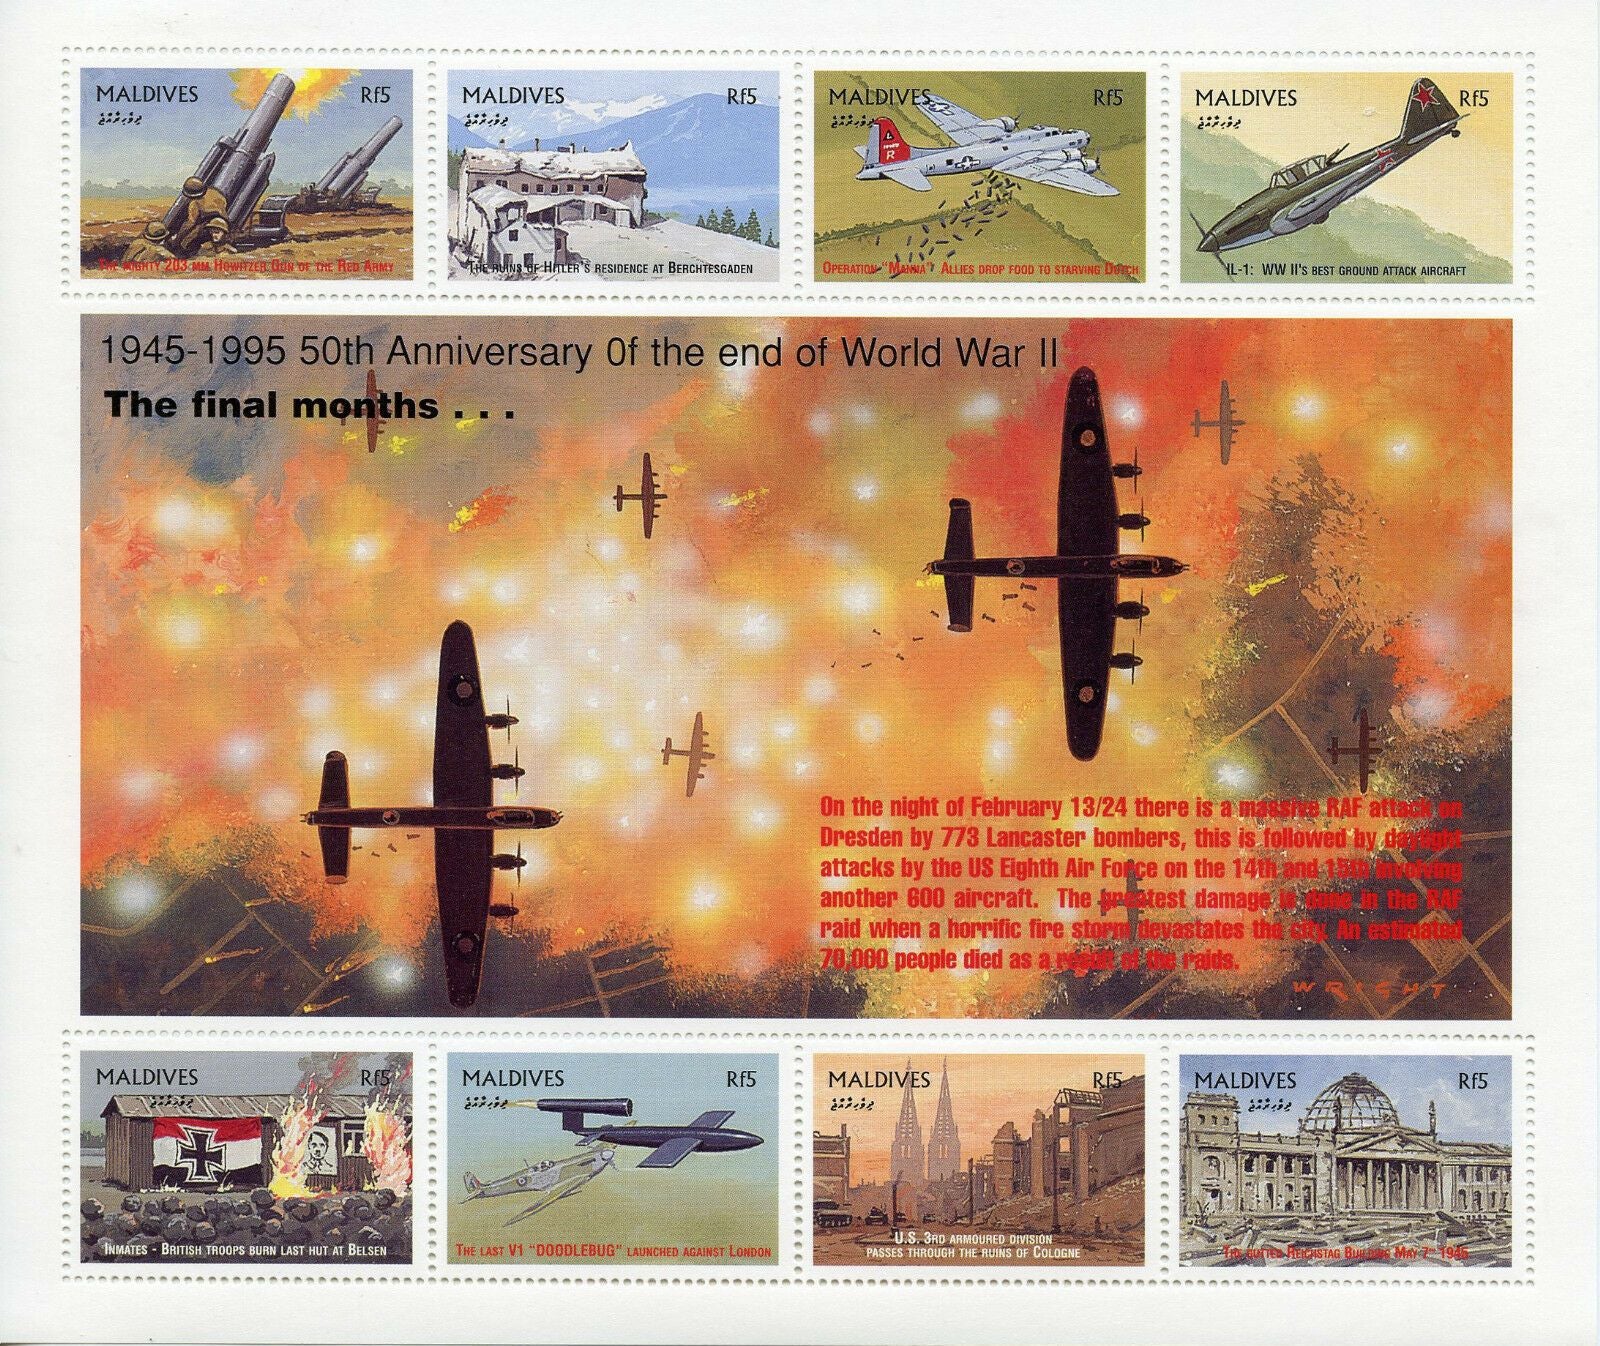 Maldives 1995 MNH Military Stamps WWII WW2 VE Day End World War II 8v M/S